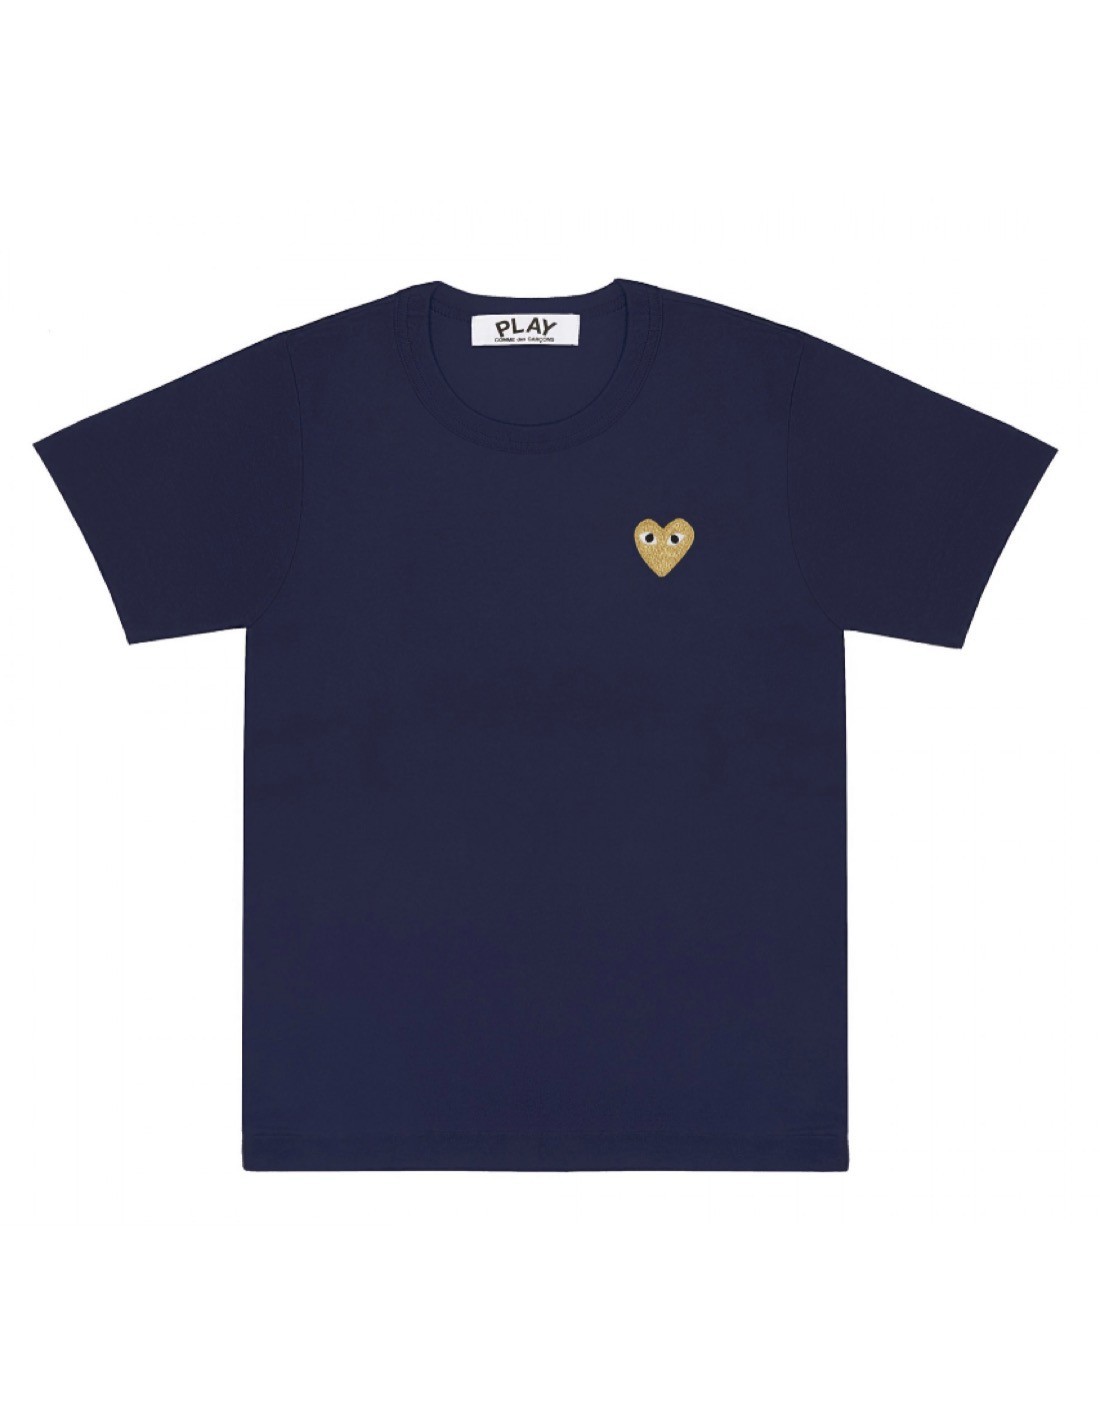 tee shirt play comme des garcons